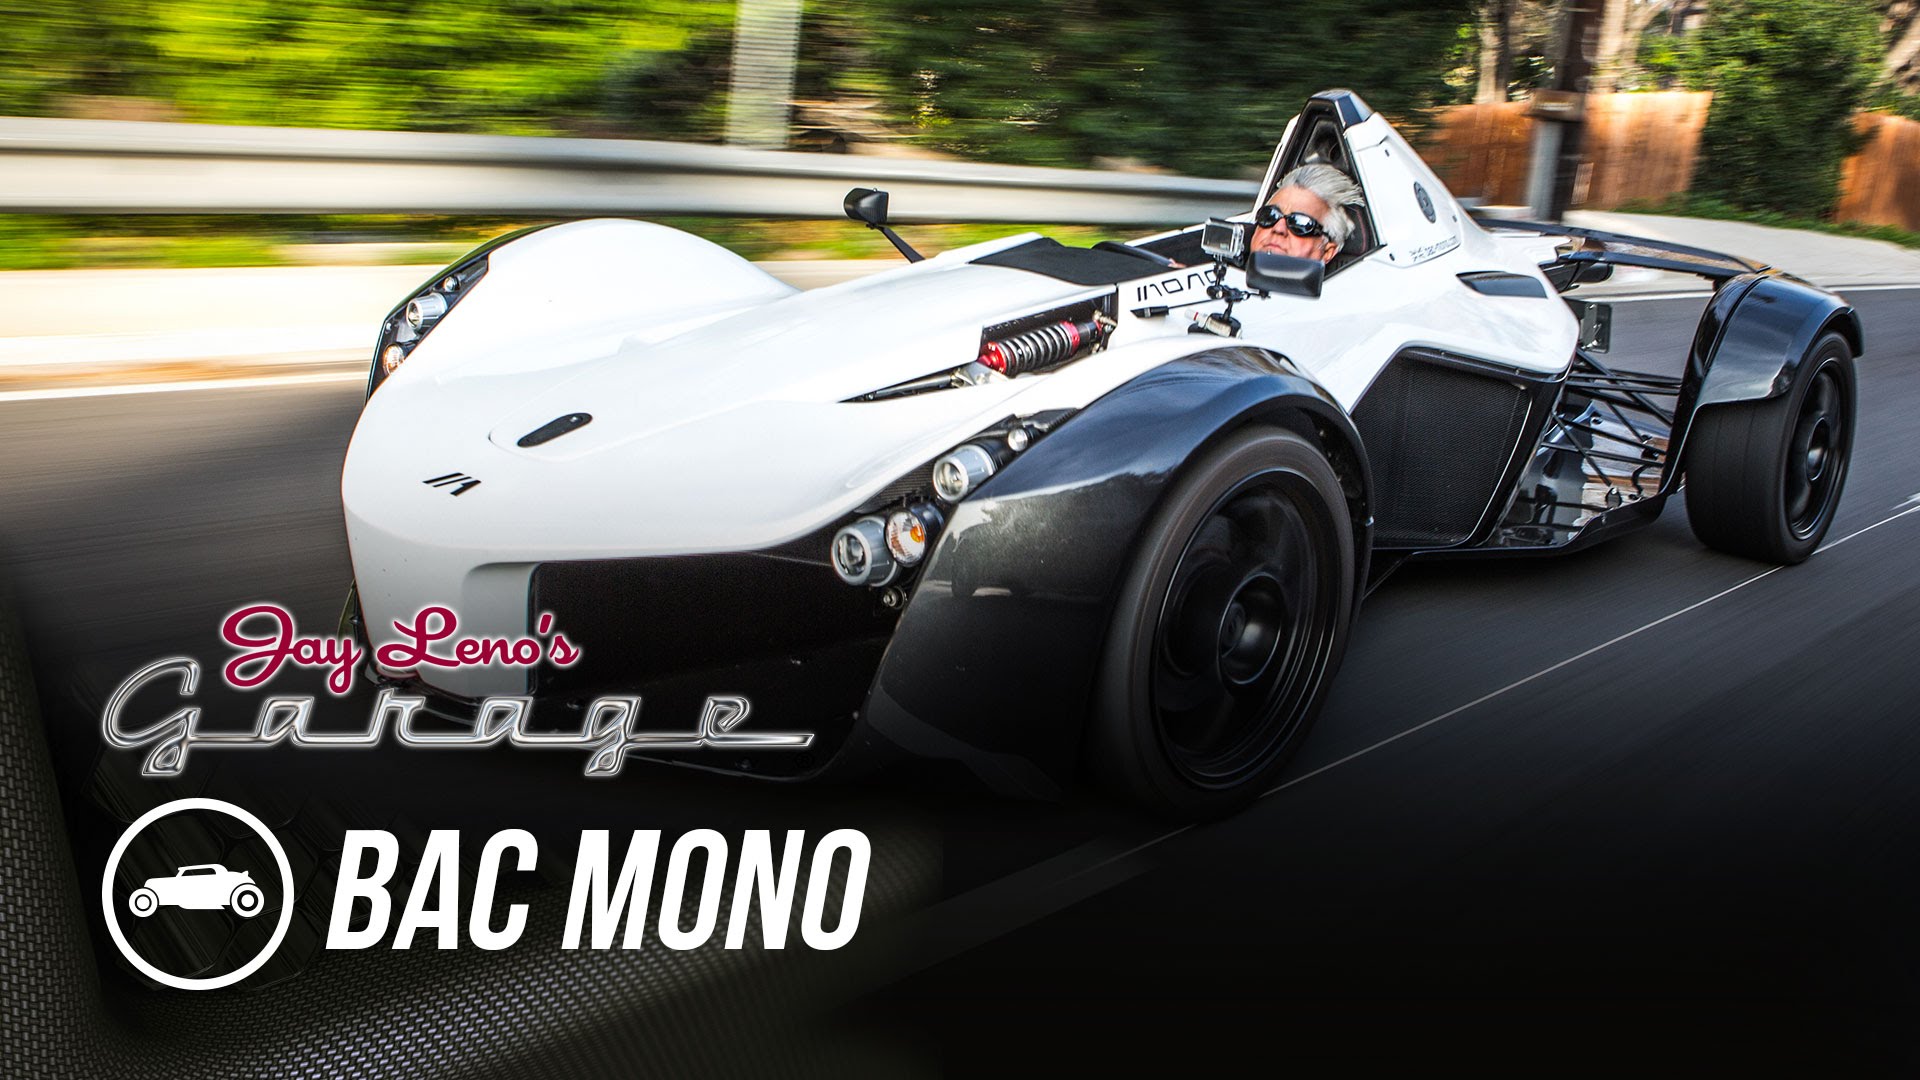 Images of BAC Mono | 1920x1080